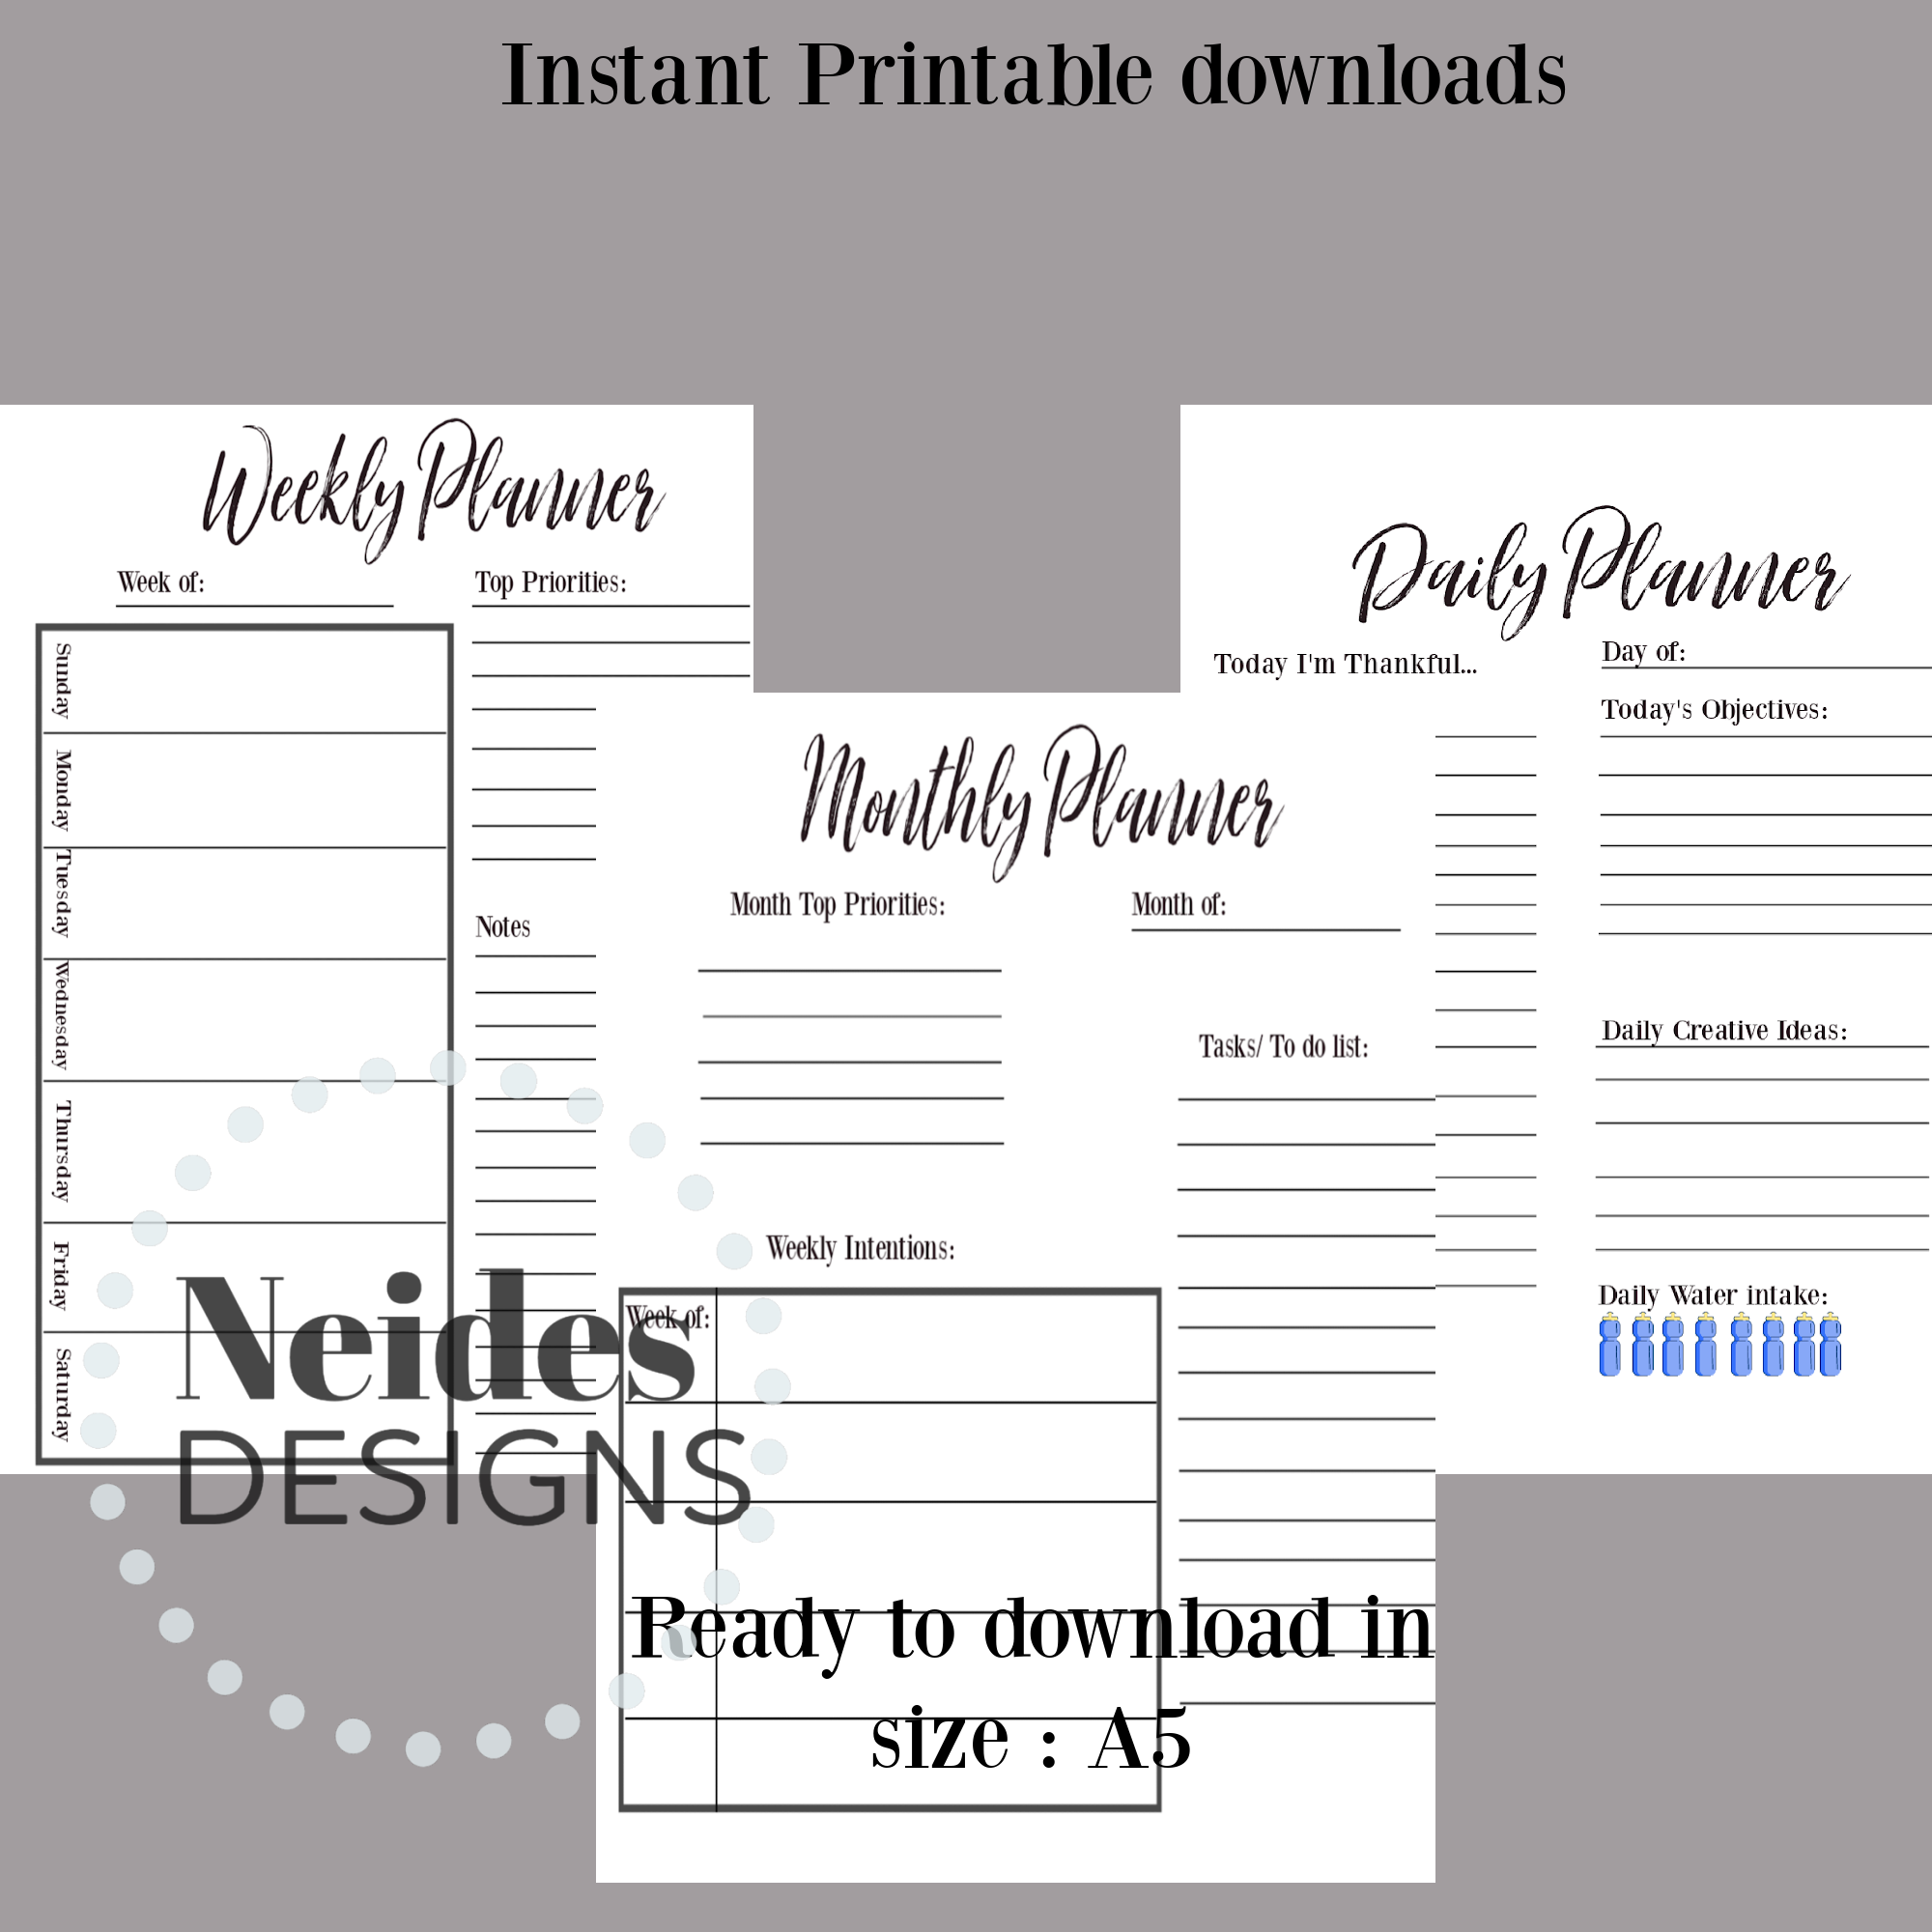 Lined Note Pages | A5 Planner Inserts | Day Designer